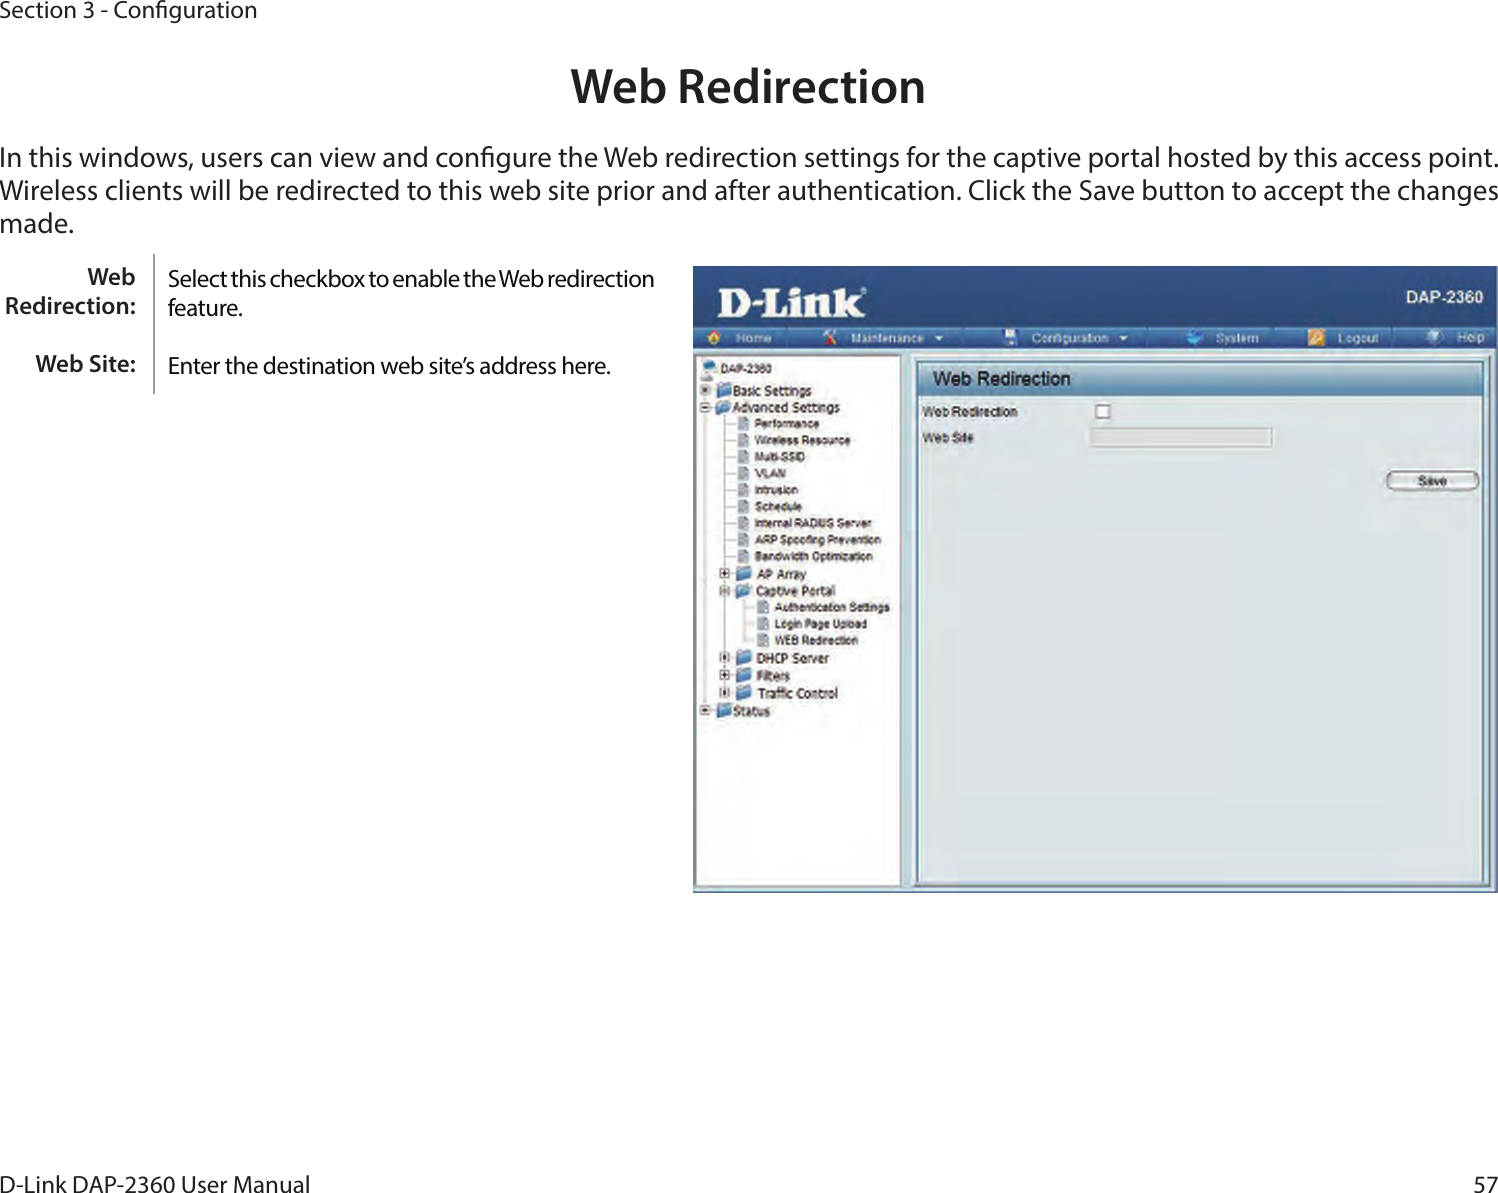 57D-Link DAP-2360 User ManualSection 3 - CongurationWeb RedirectionIn this windows, users can view and congure the Web redirection settings for the captive portal hosted by this access point. Wireless clients will be redirected to this web site prior and after authentication. Click the Save button to accept the changes made.Select this checkbox to enable the Web redirection feature.Enter the destination web site’s address here.Web Redirection:Web Site: